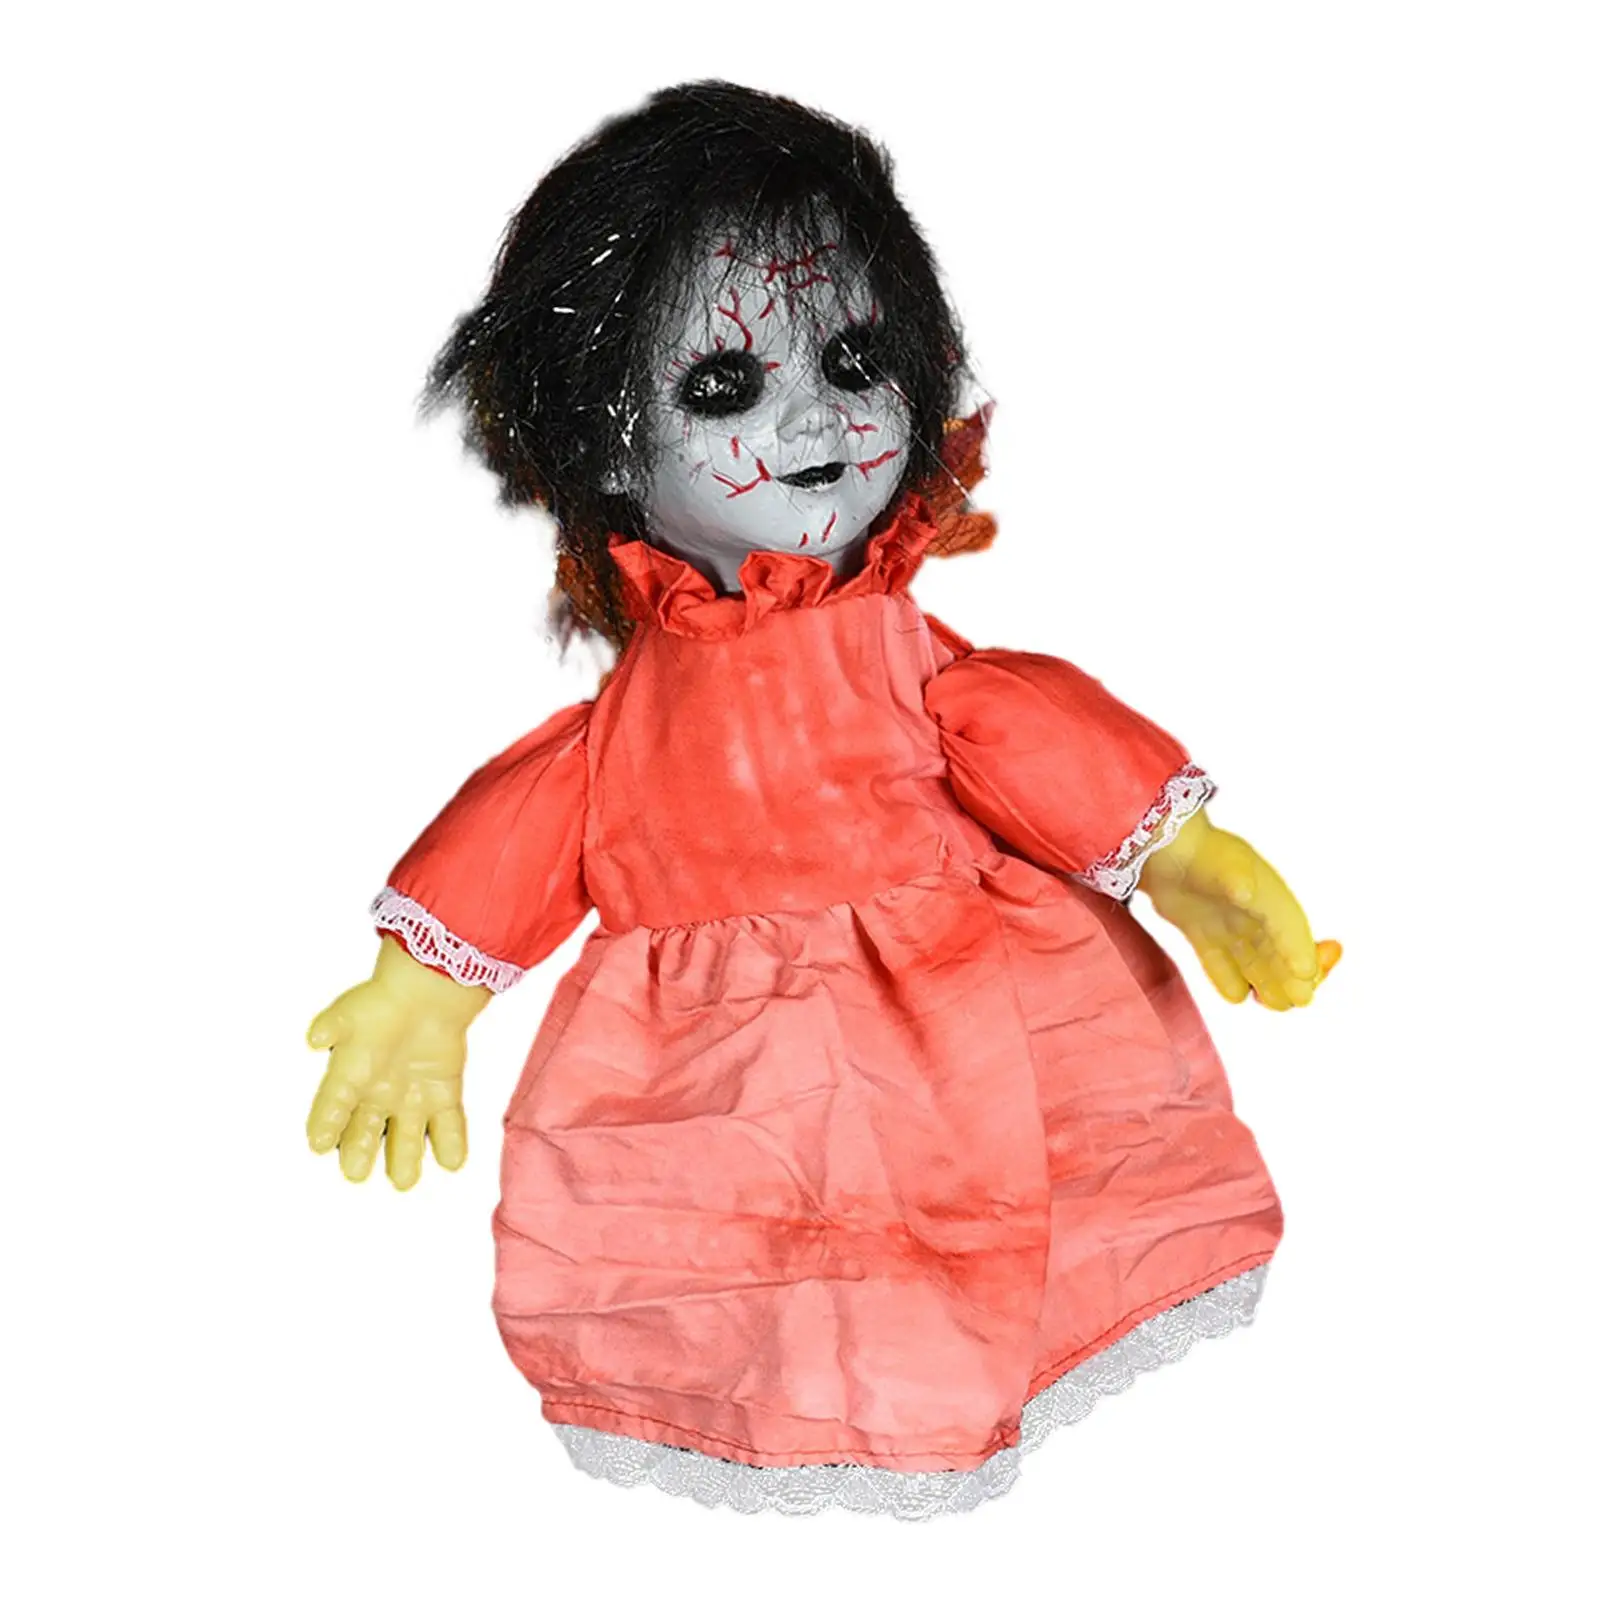 Halloween Baby Doll Terror Decoration Toy Sound and Touch Activated Haunted Doll for Indoor Outdoor Haunted House Halloween Bar